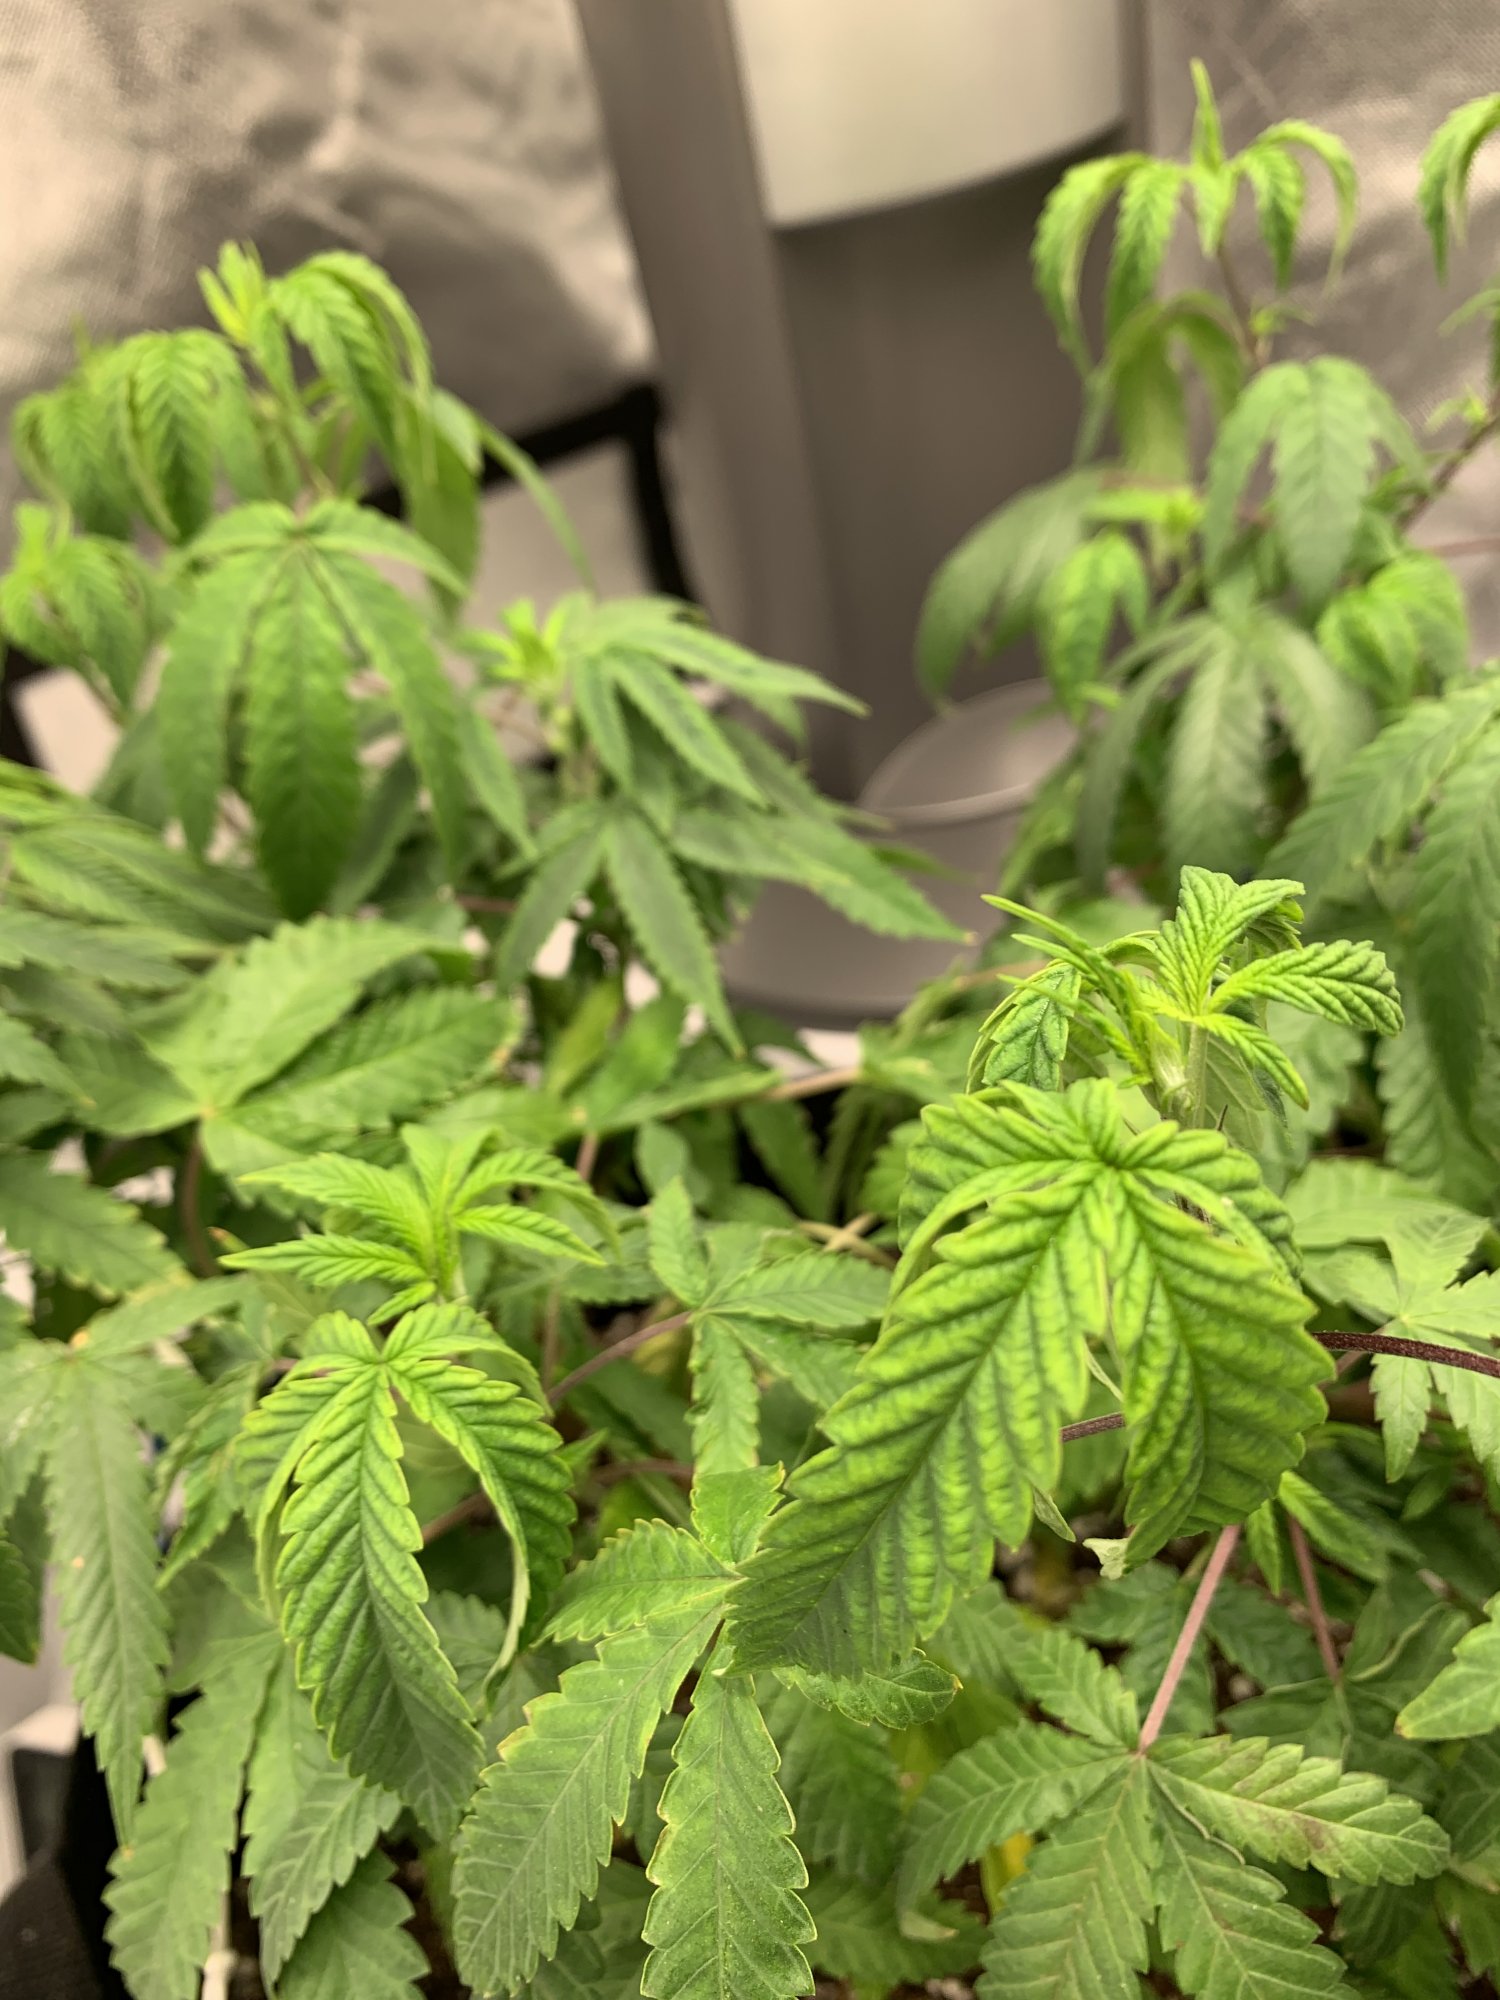 Need help to diagnose my plant